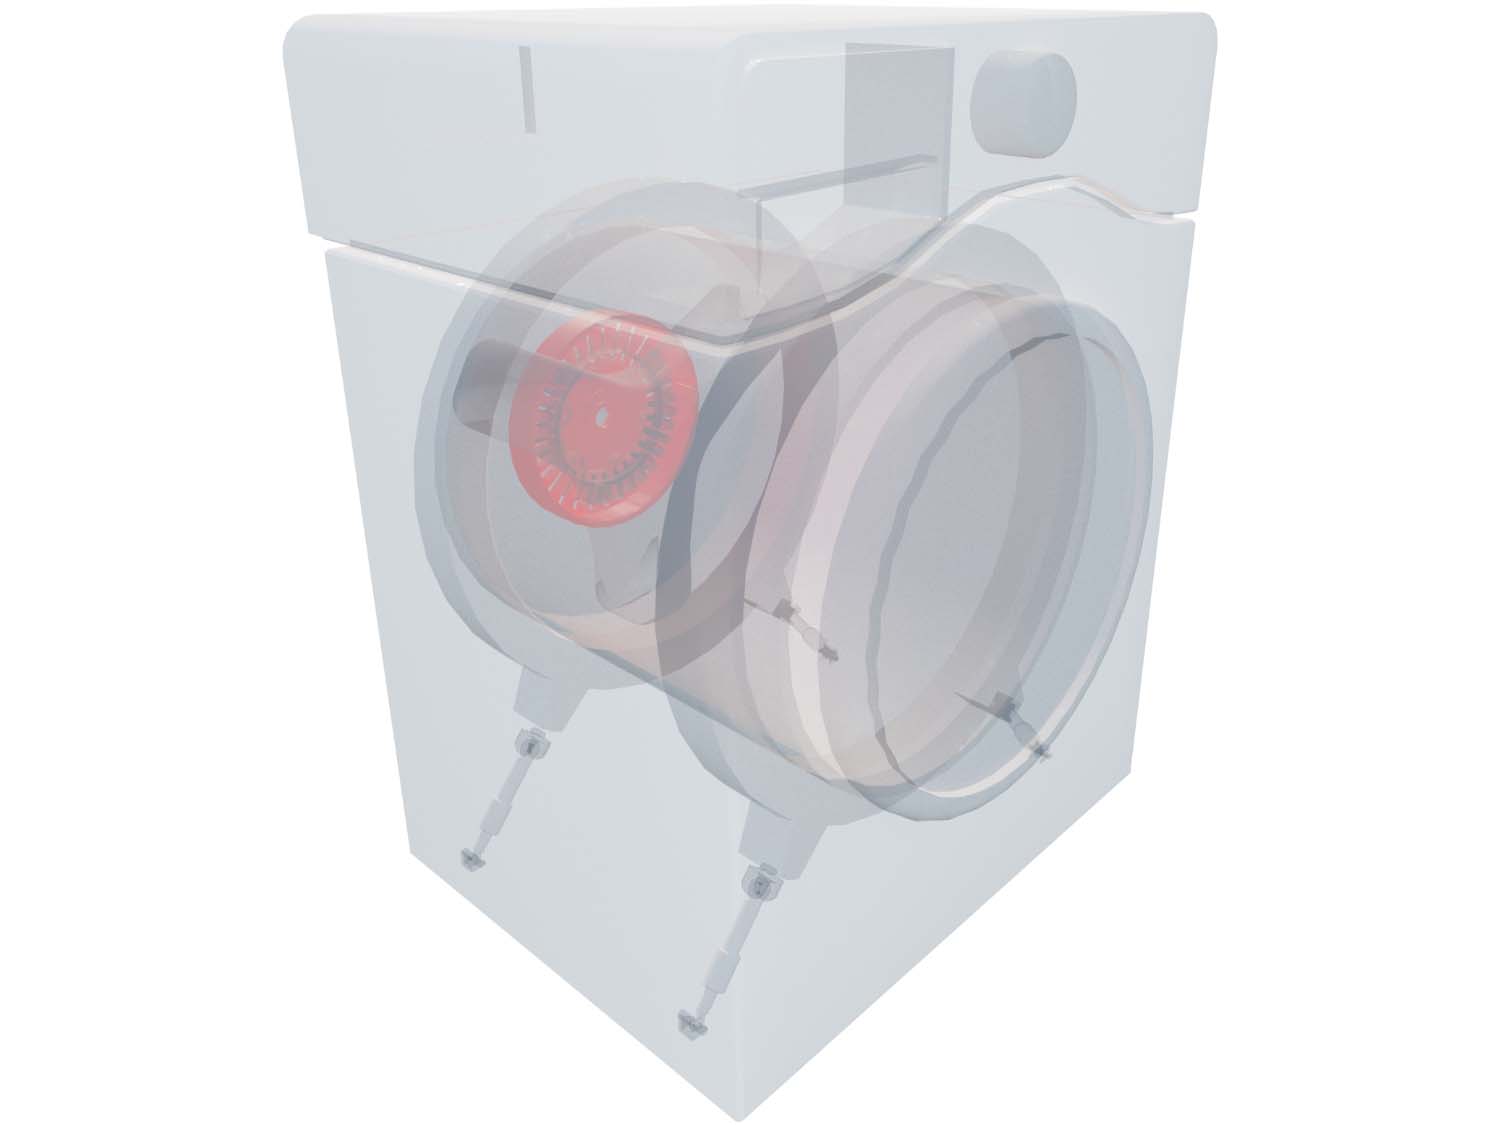 A 3D diagram showing the components of a washer and specifying the location of the rotor